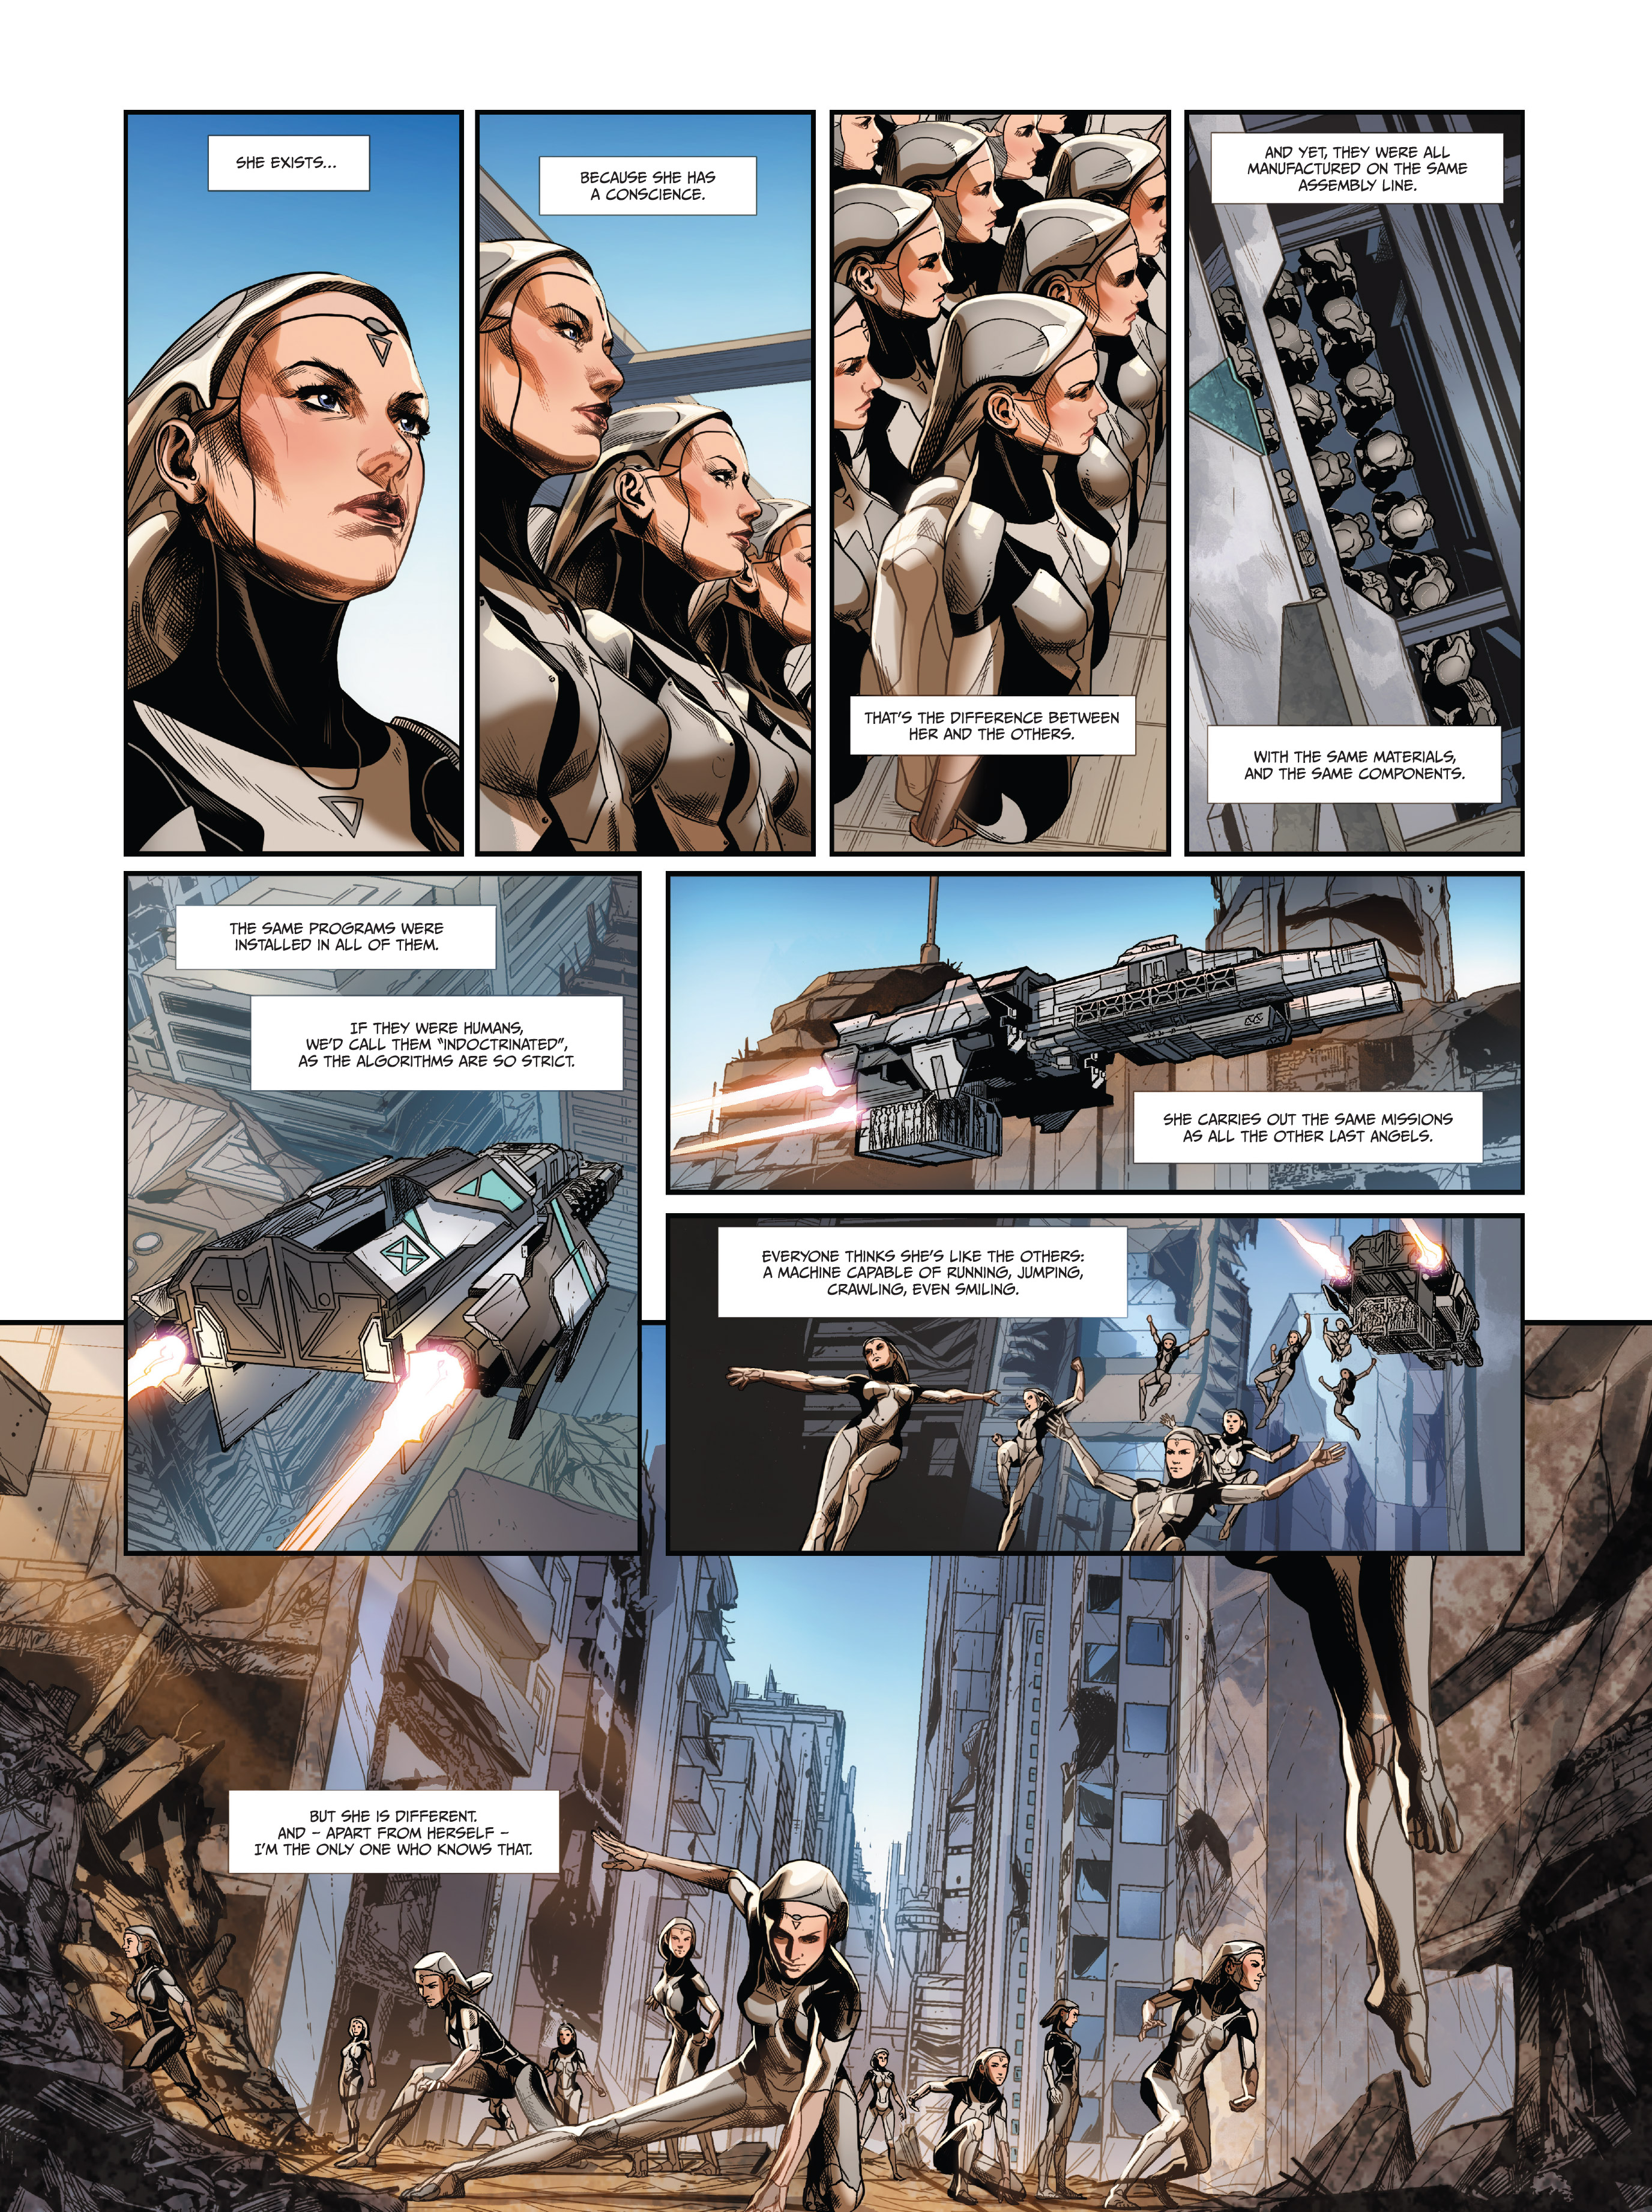 Androids (2016-): Chapter 7 - Page 4